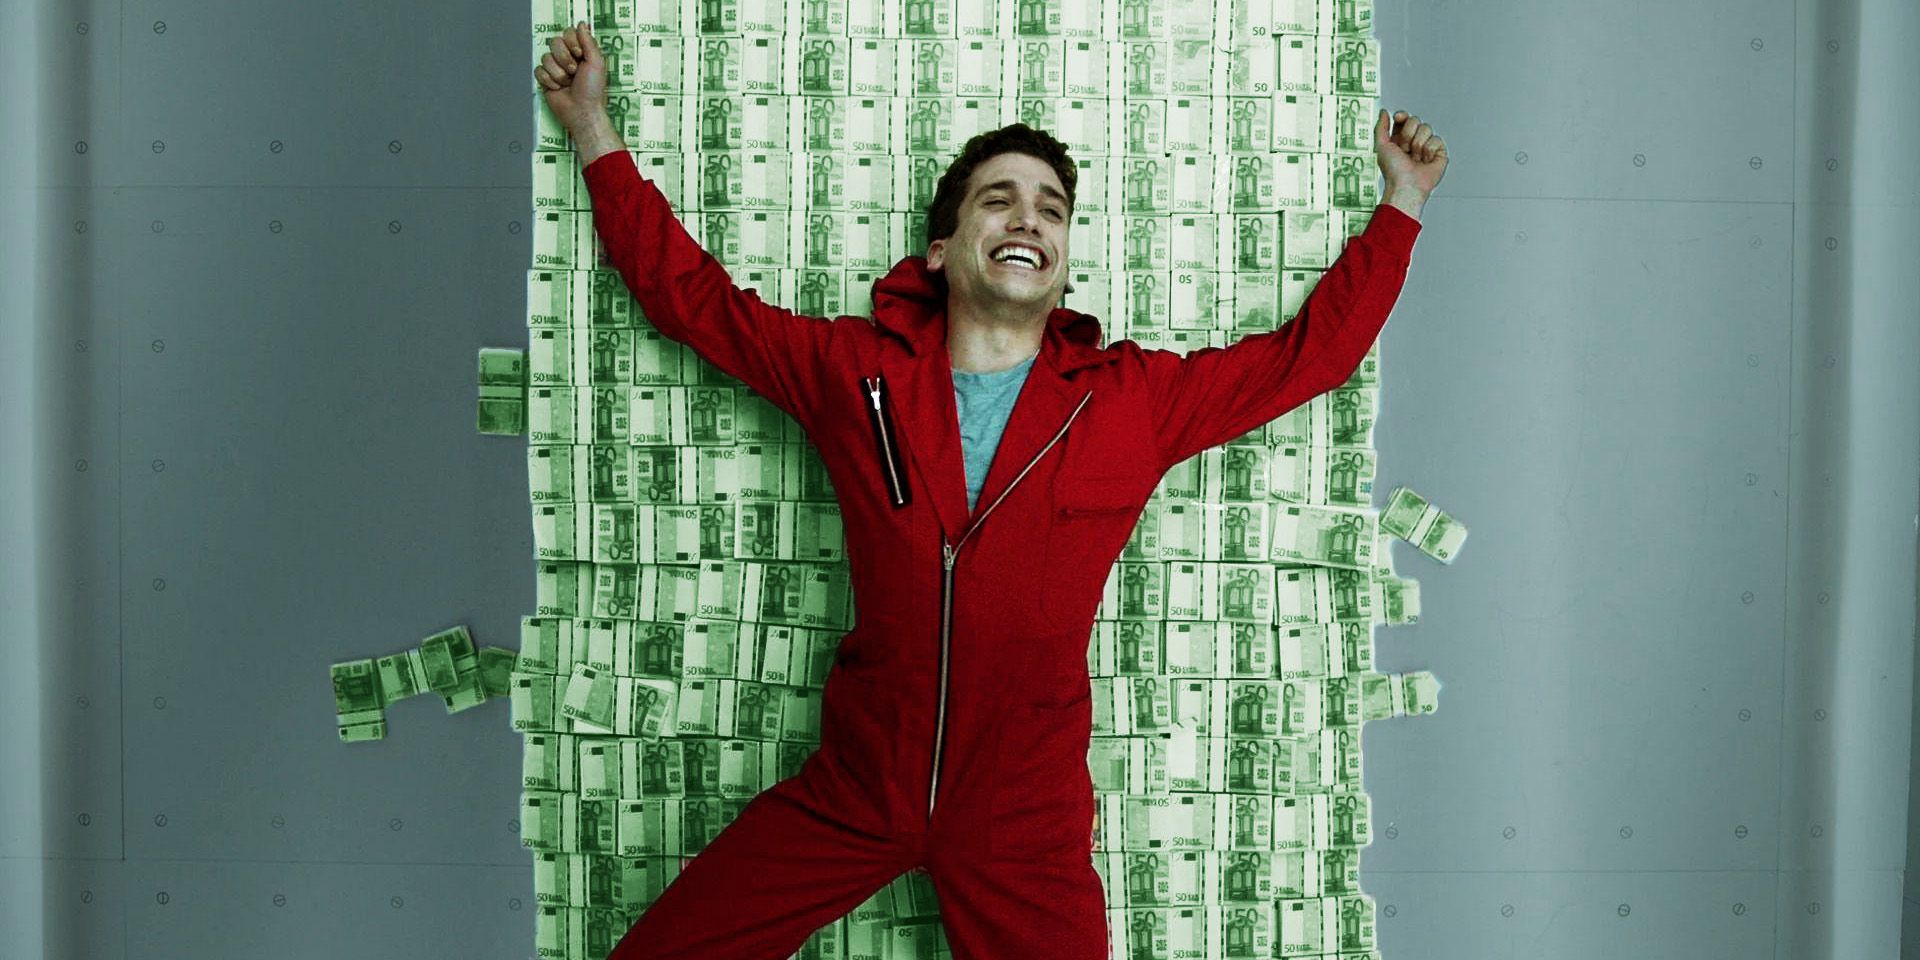 Money Heist One Quote From Each Character That Perfectly Sums Up Their Personality